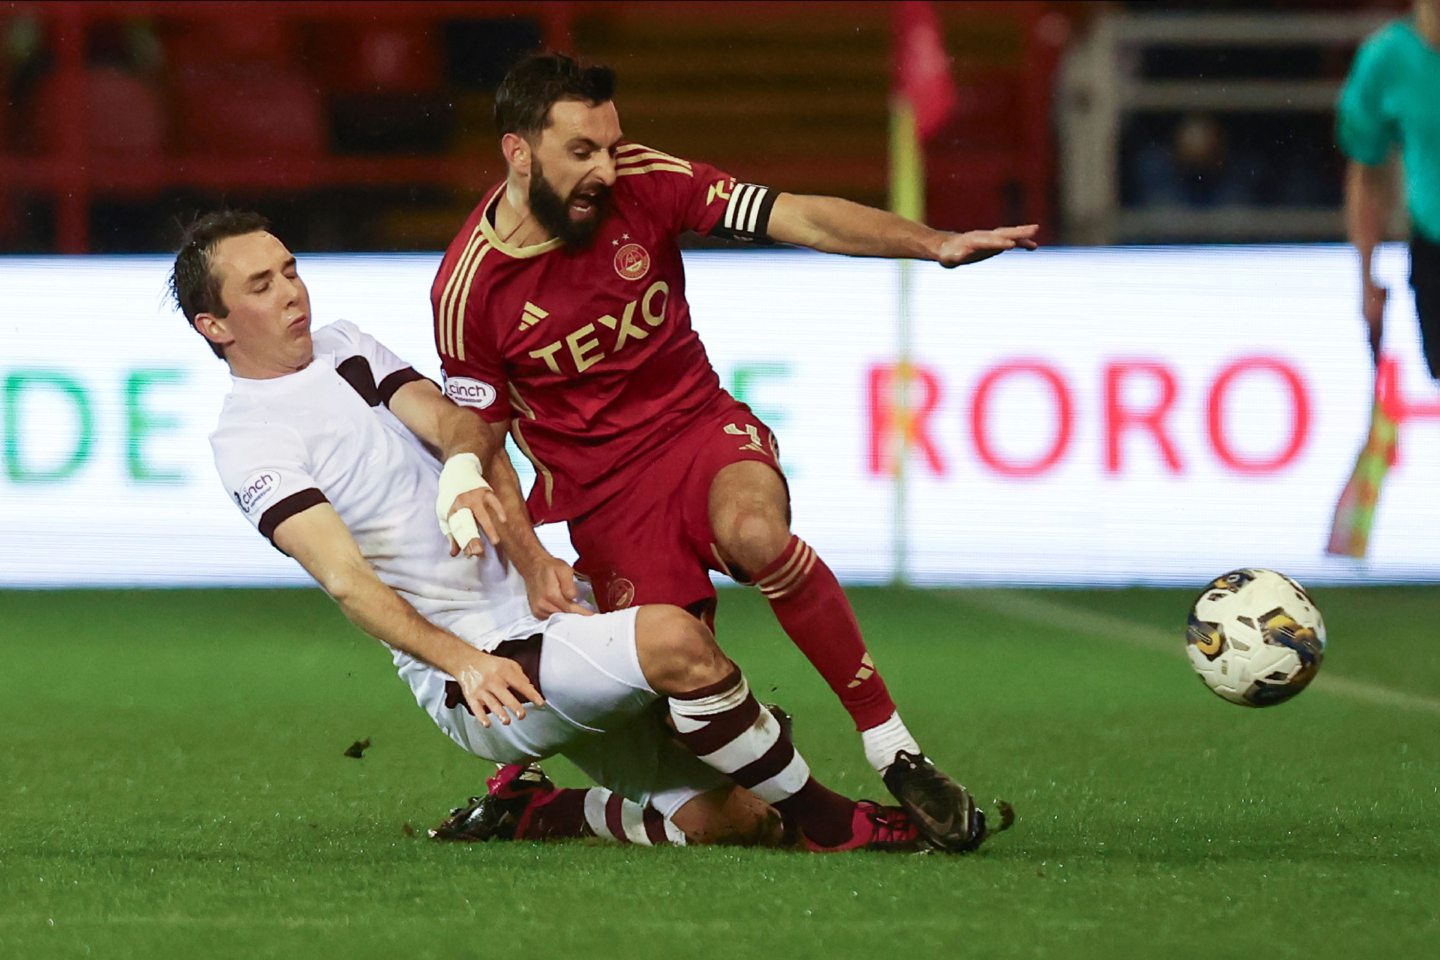 Aberdeen skipper Graeme Shinnie in action during the 2-1 Premiership defeat of Hearts at Pittodrie. Image: Shutterstock 